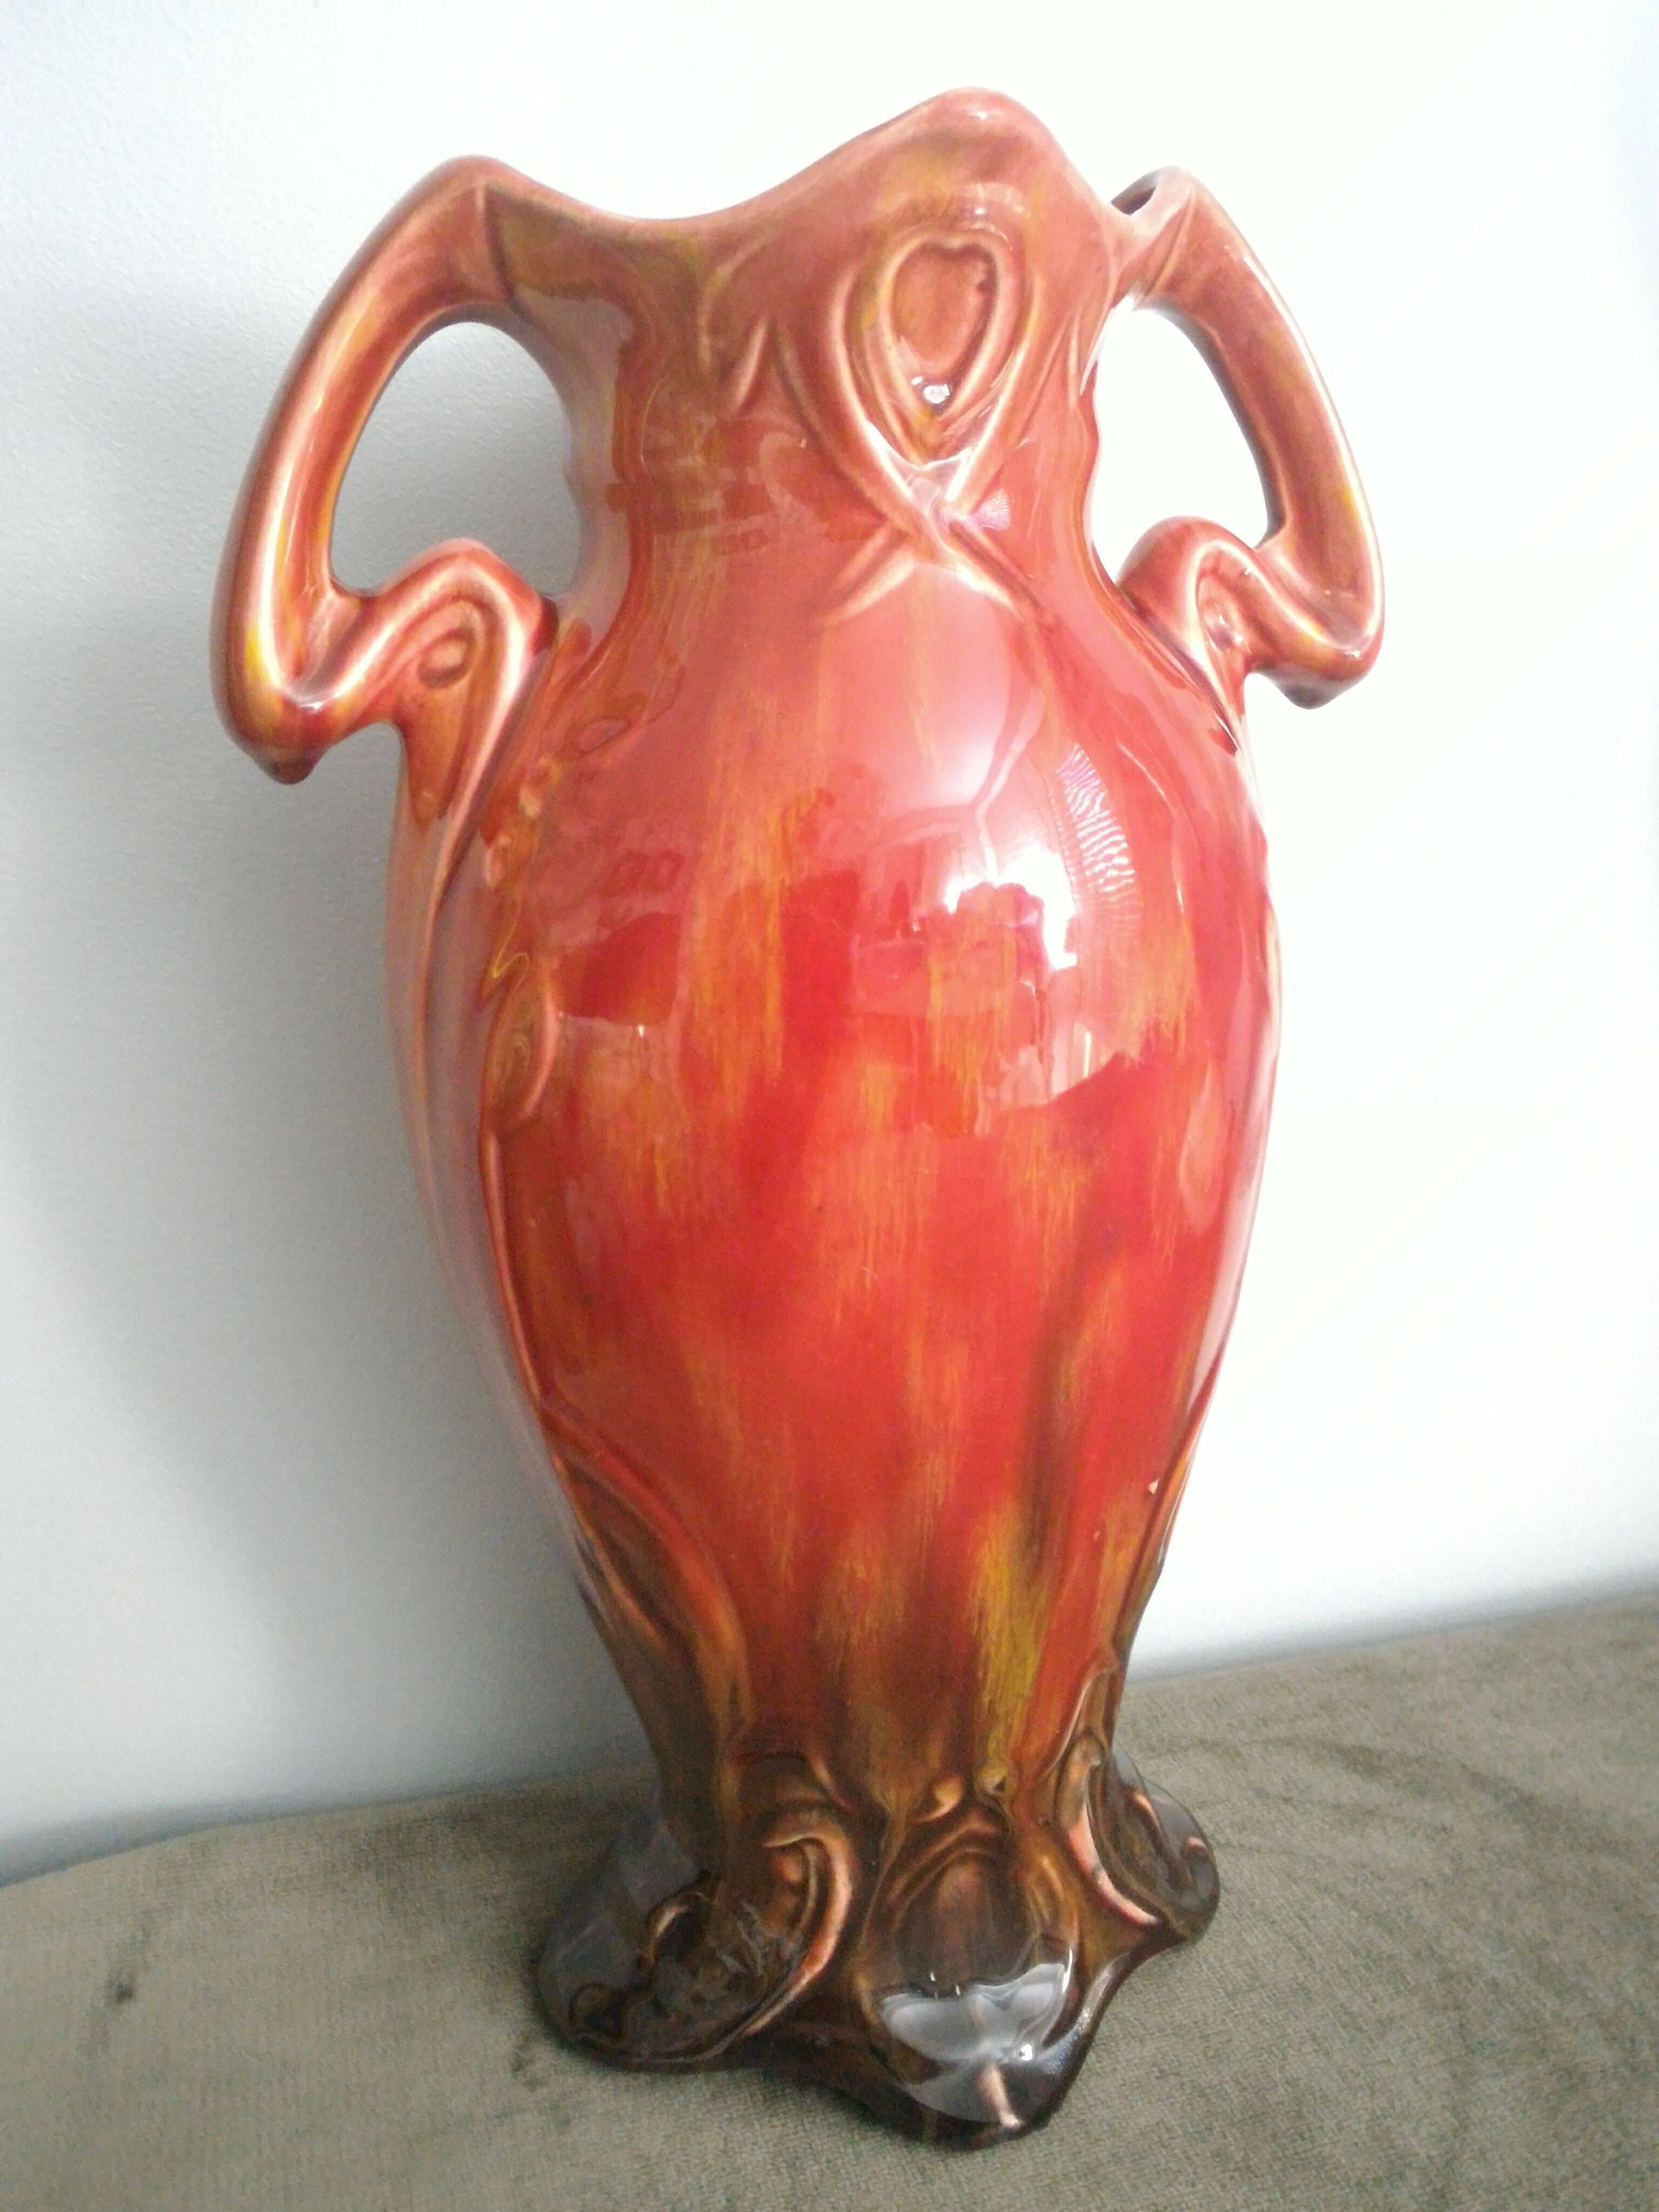 Charming and feminine Art Nouveau vase, with gorgeous decoration, handles and lines in very elegant different shades of burgundy.
In a very good condition. Numbered but the signature has faded away.